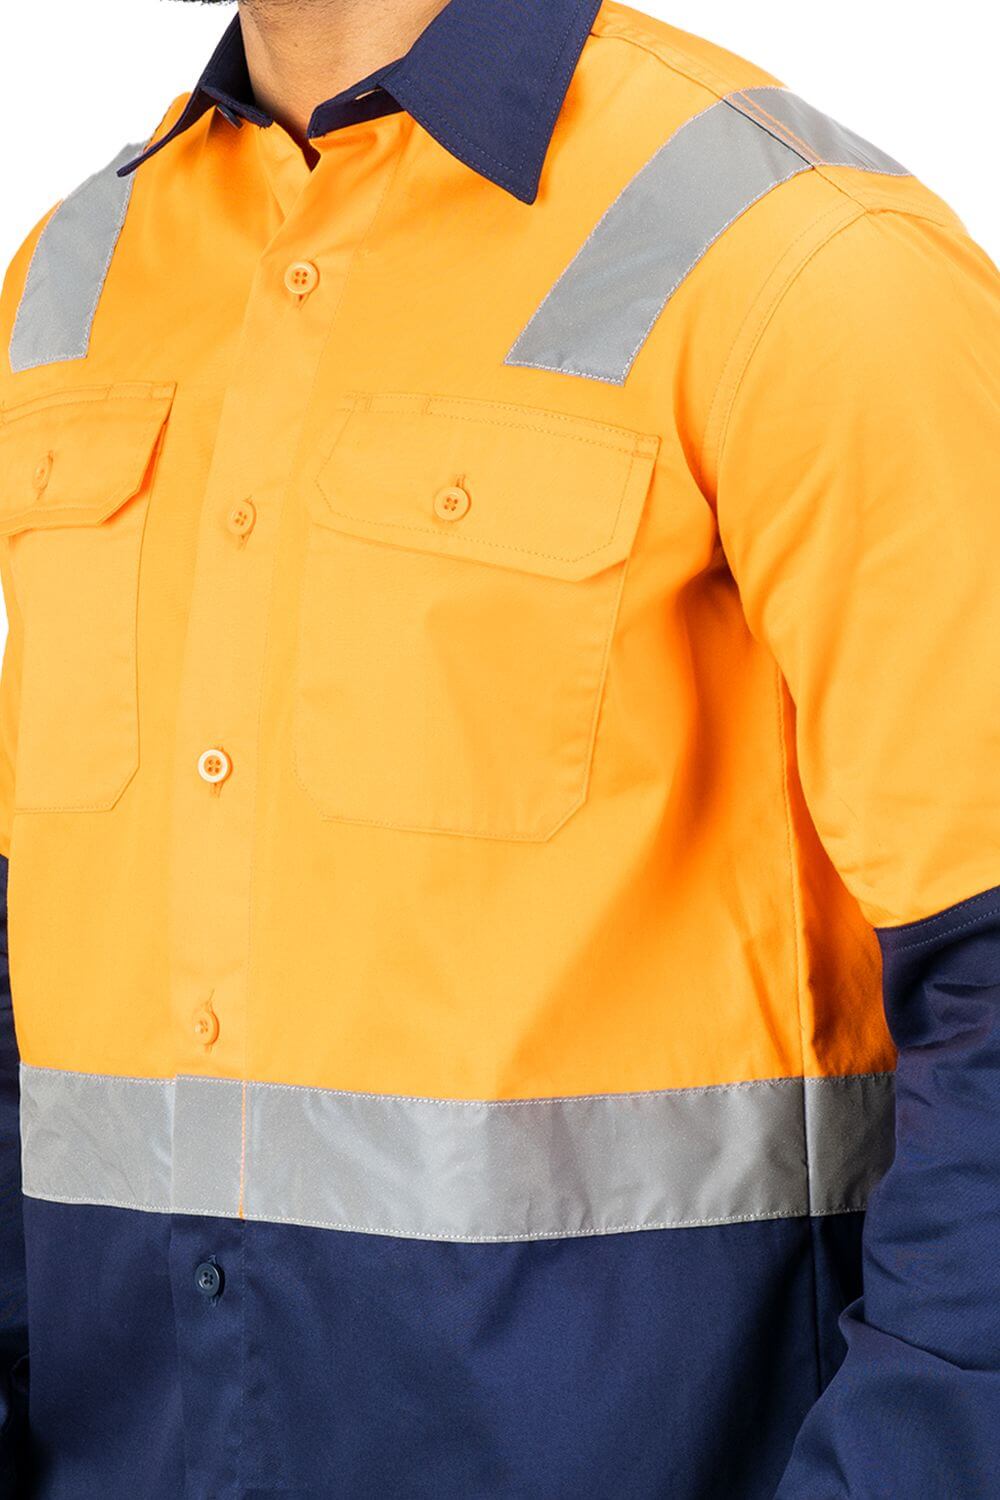 Hi-Viz dual-tone AS/NZS 4602.1:2011 standards compliant work shirt designed to provide optimum comfort and mobility during the strenuous hours at work.